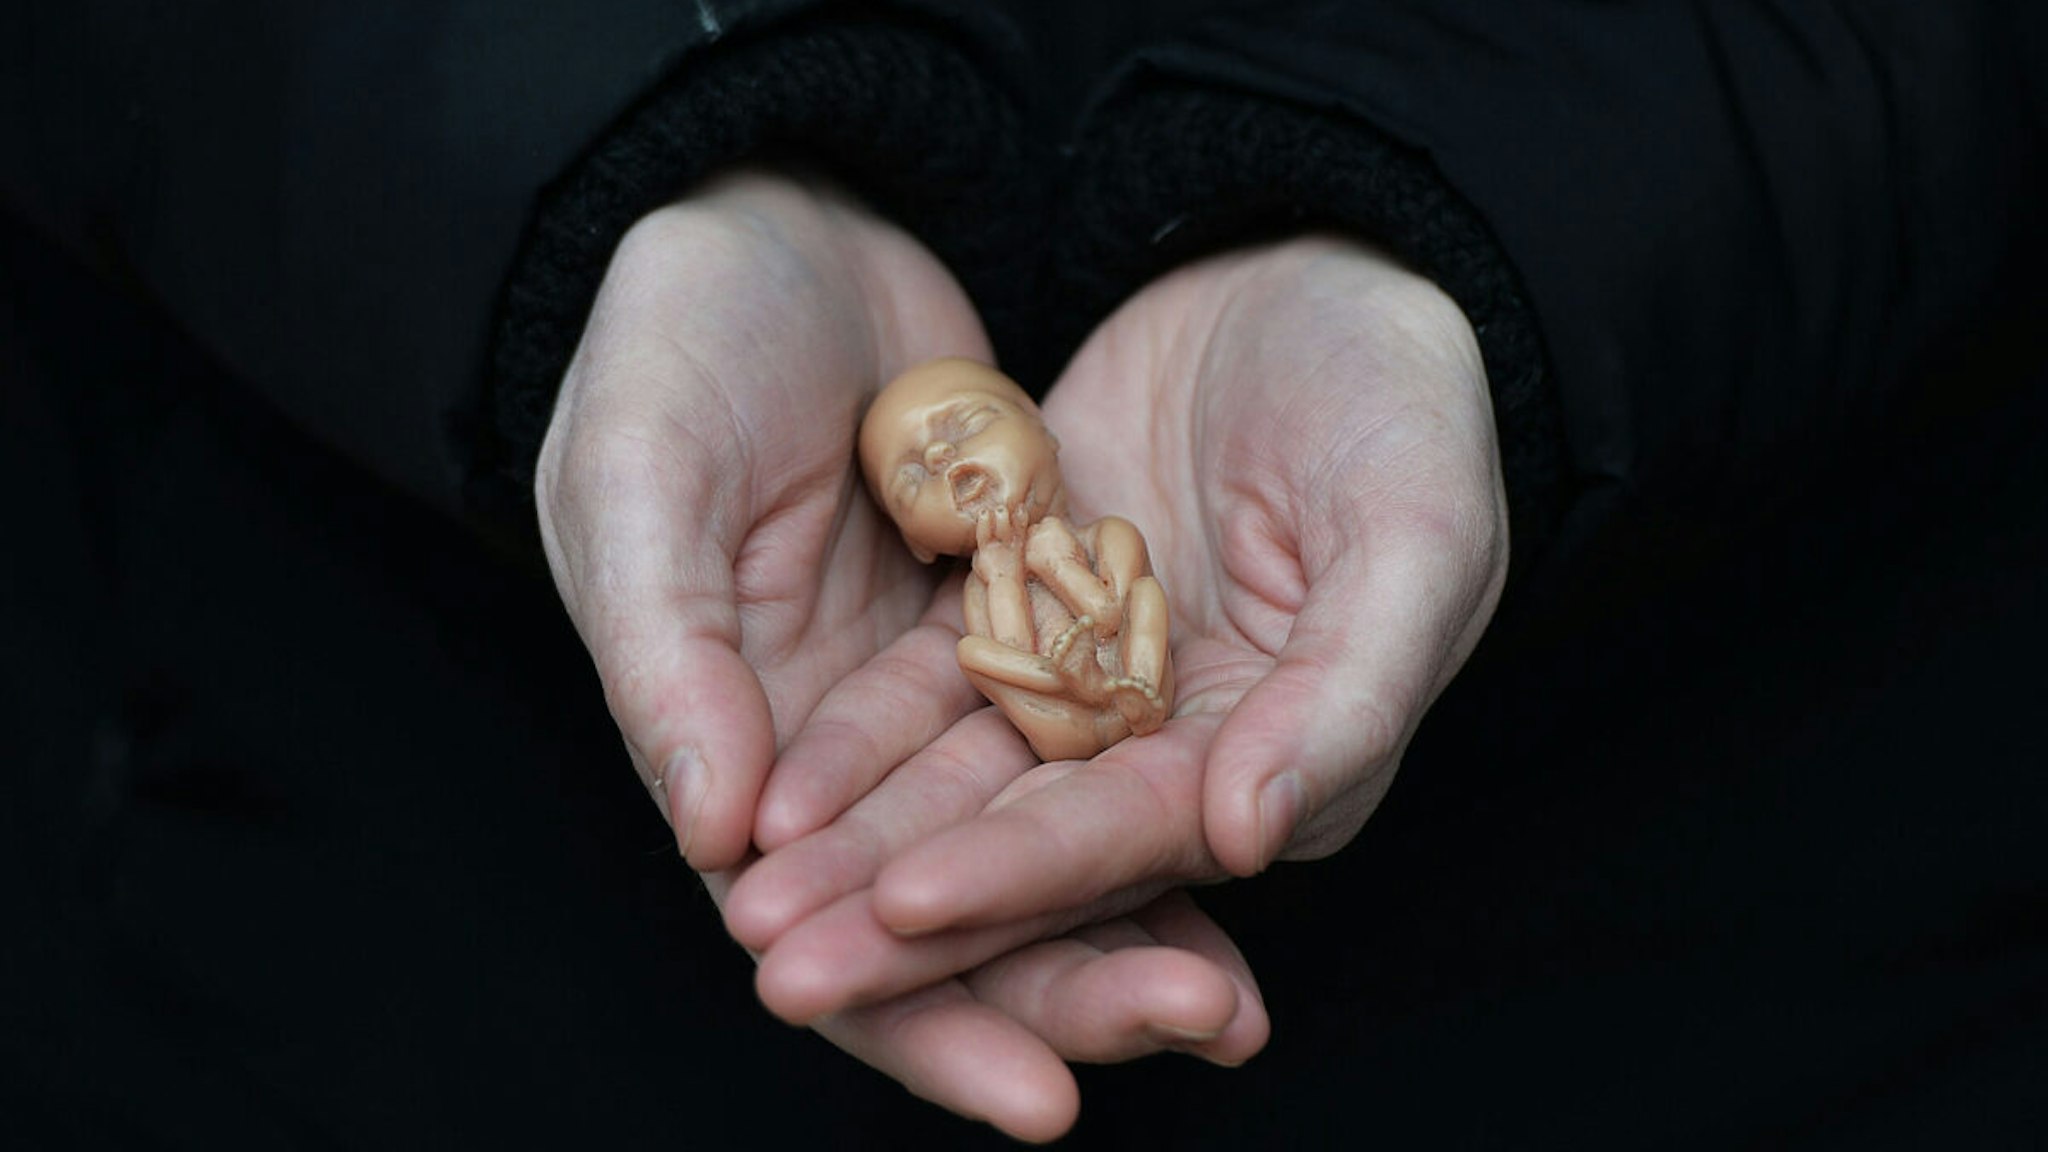 A Pro Life campaigner displays a plastic doll representing a 12 week old foetus as she stands outside the Marie Stopes Clinic on April 7, 2016 in Belfast, Northern Ireland